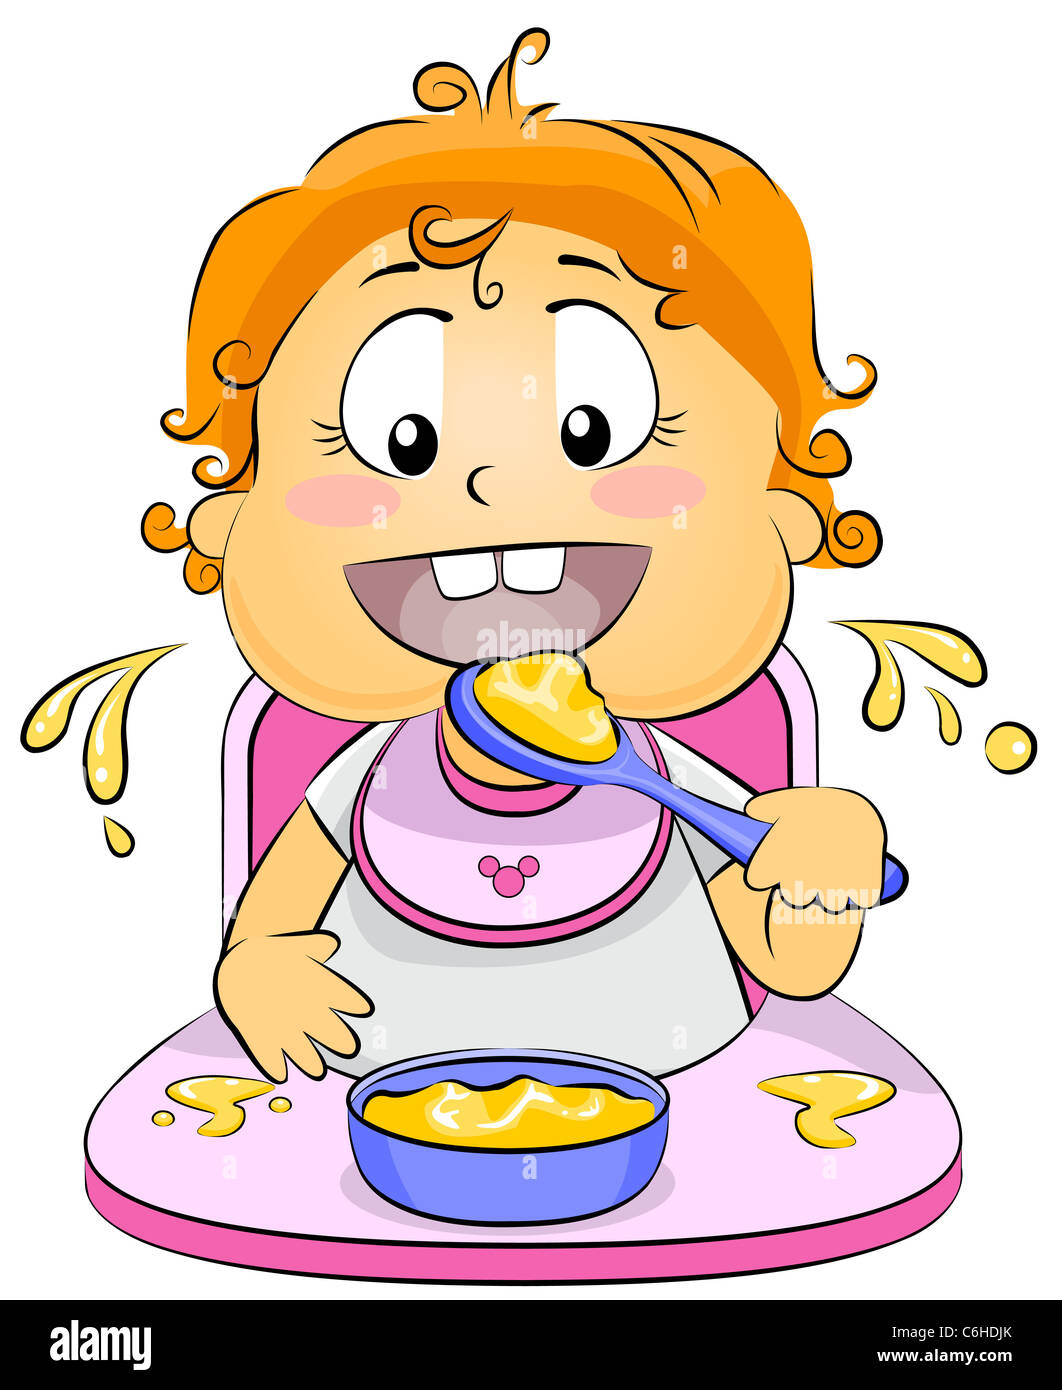 Illustration of a Baby Eating Baby Food Stock Photo - Alamy